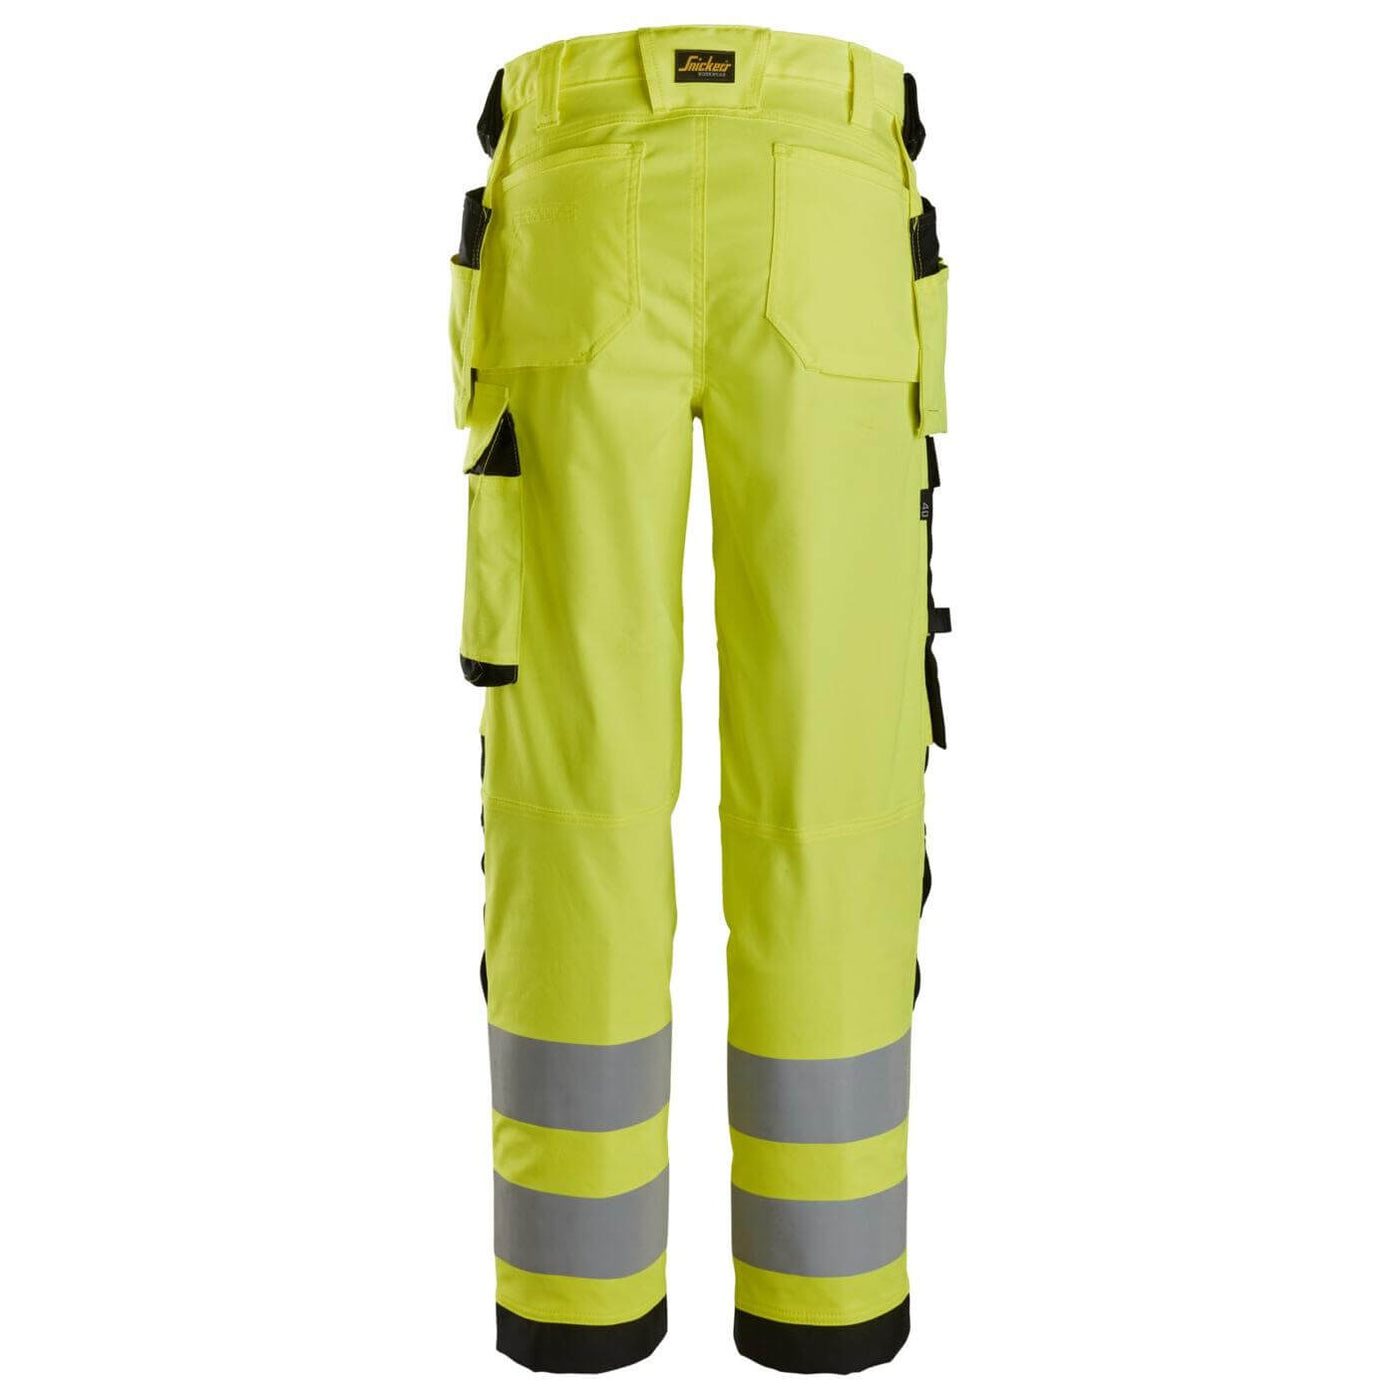 Snickers 6743 Hi Vis Womens Slim Fit Stretch Trousers Holster Pockets Class 2 Hi Vis Yellow Black back #colour_hi-vis-yellow-black